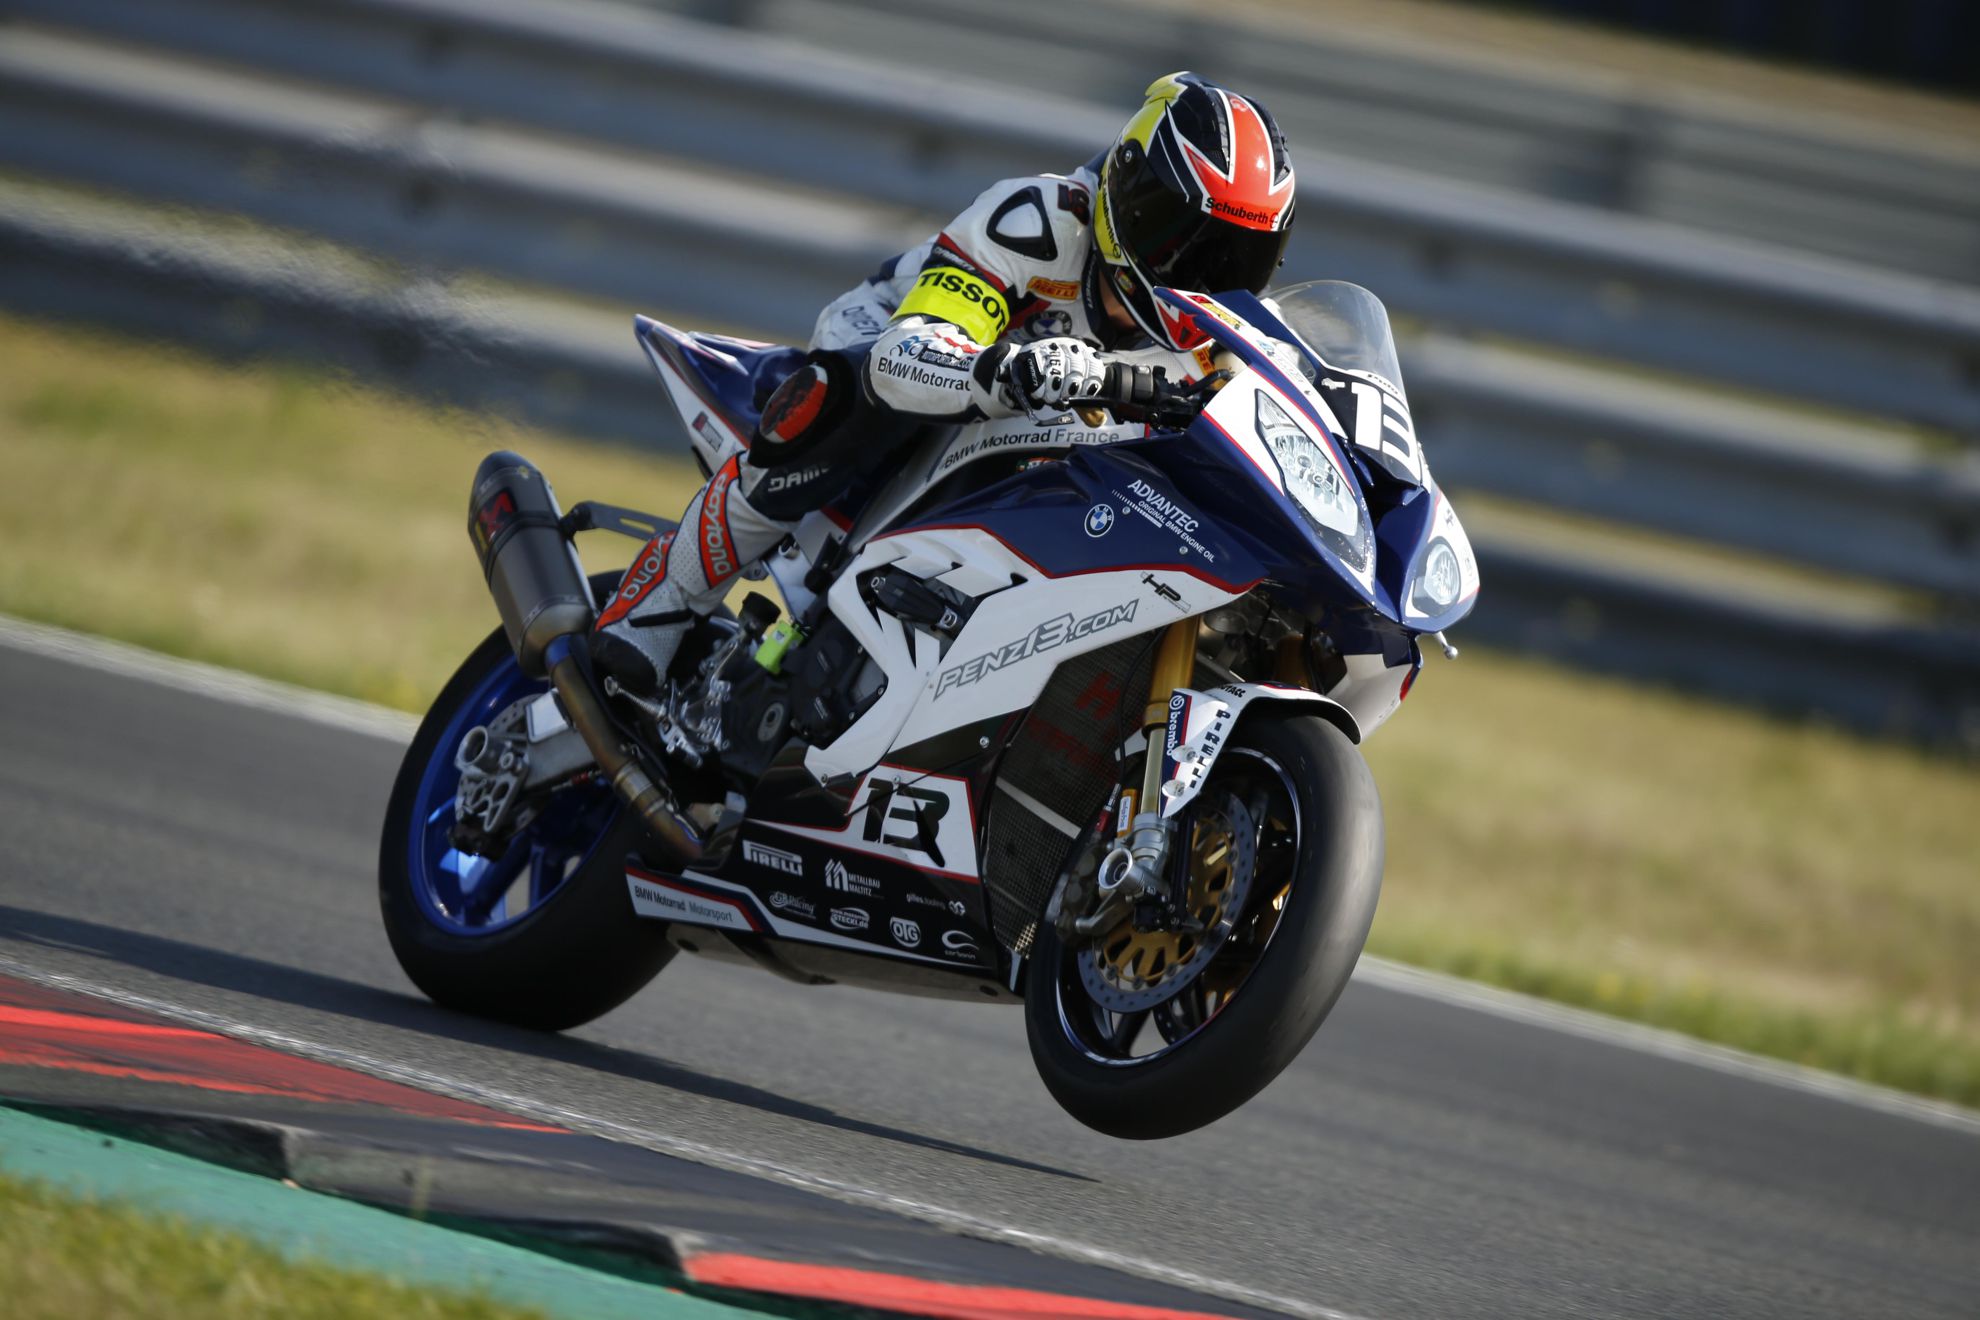 BMW Superbike Racing – Successful weekend for BMW in British BSB